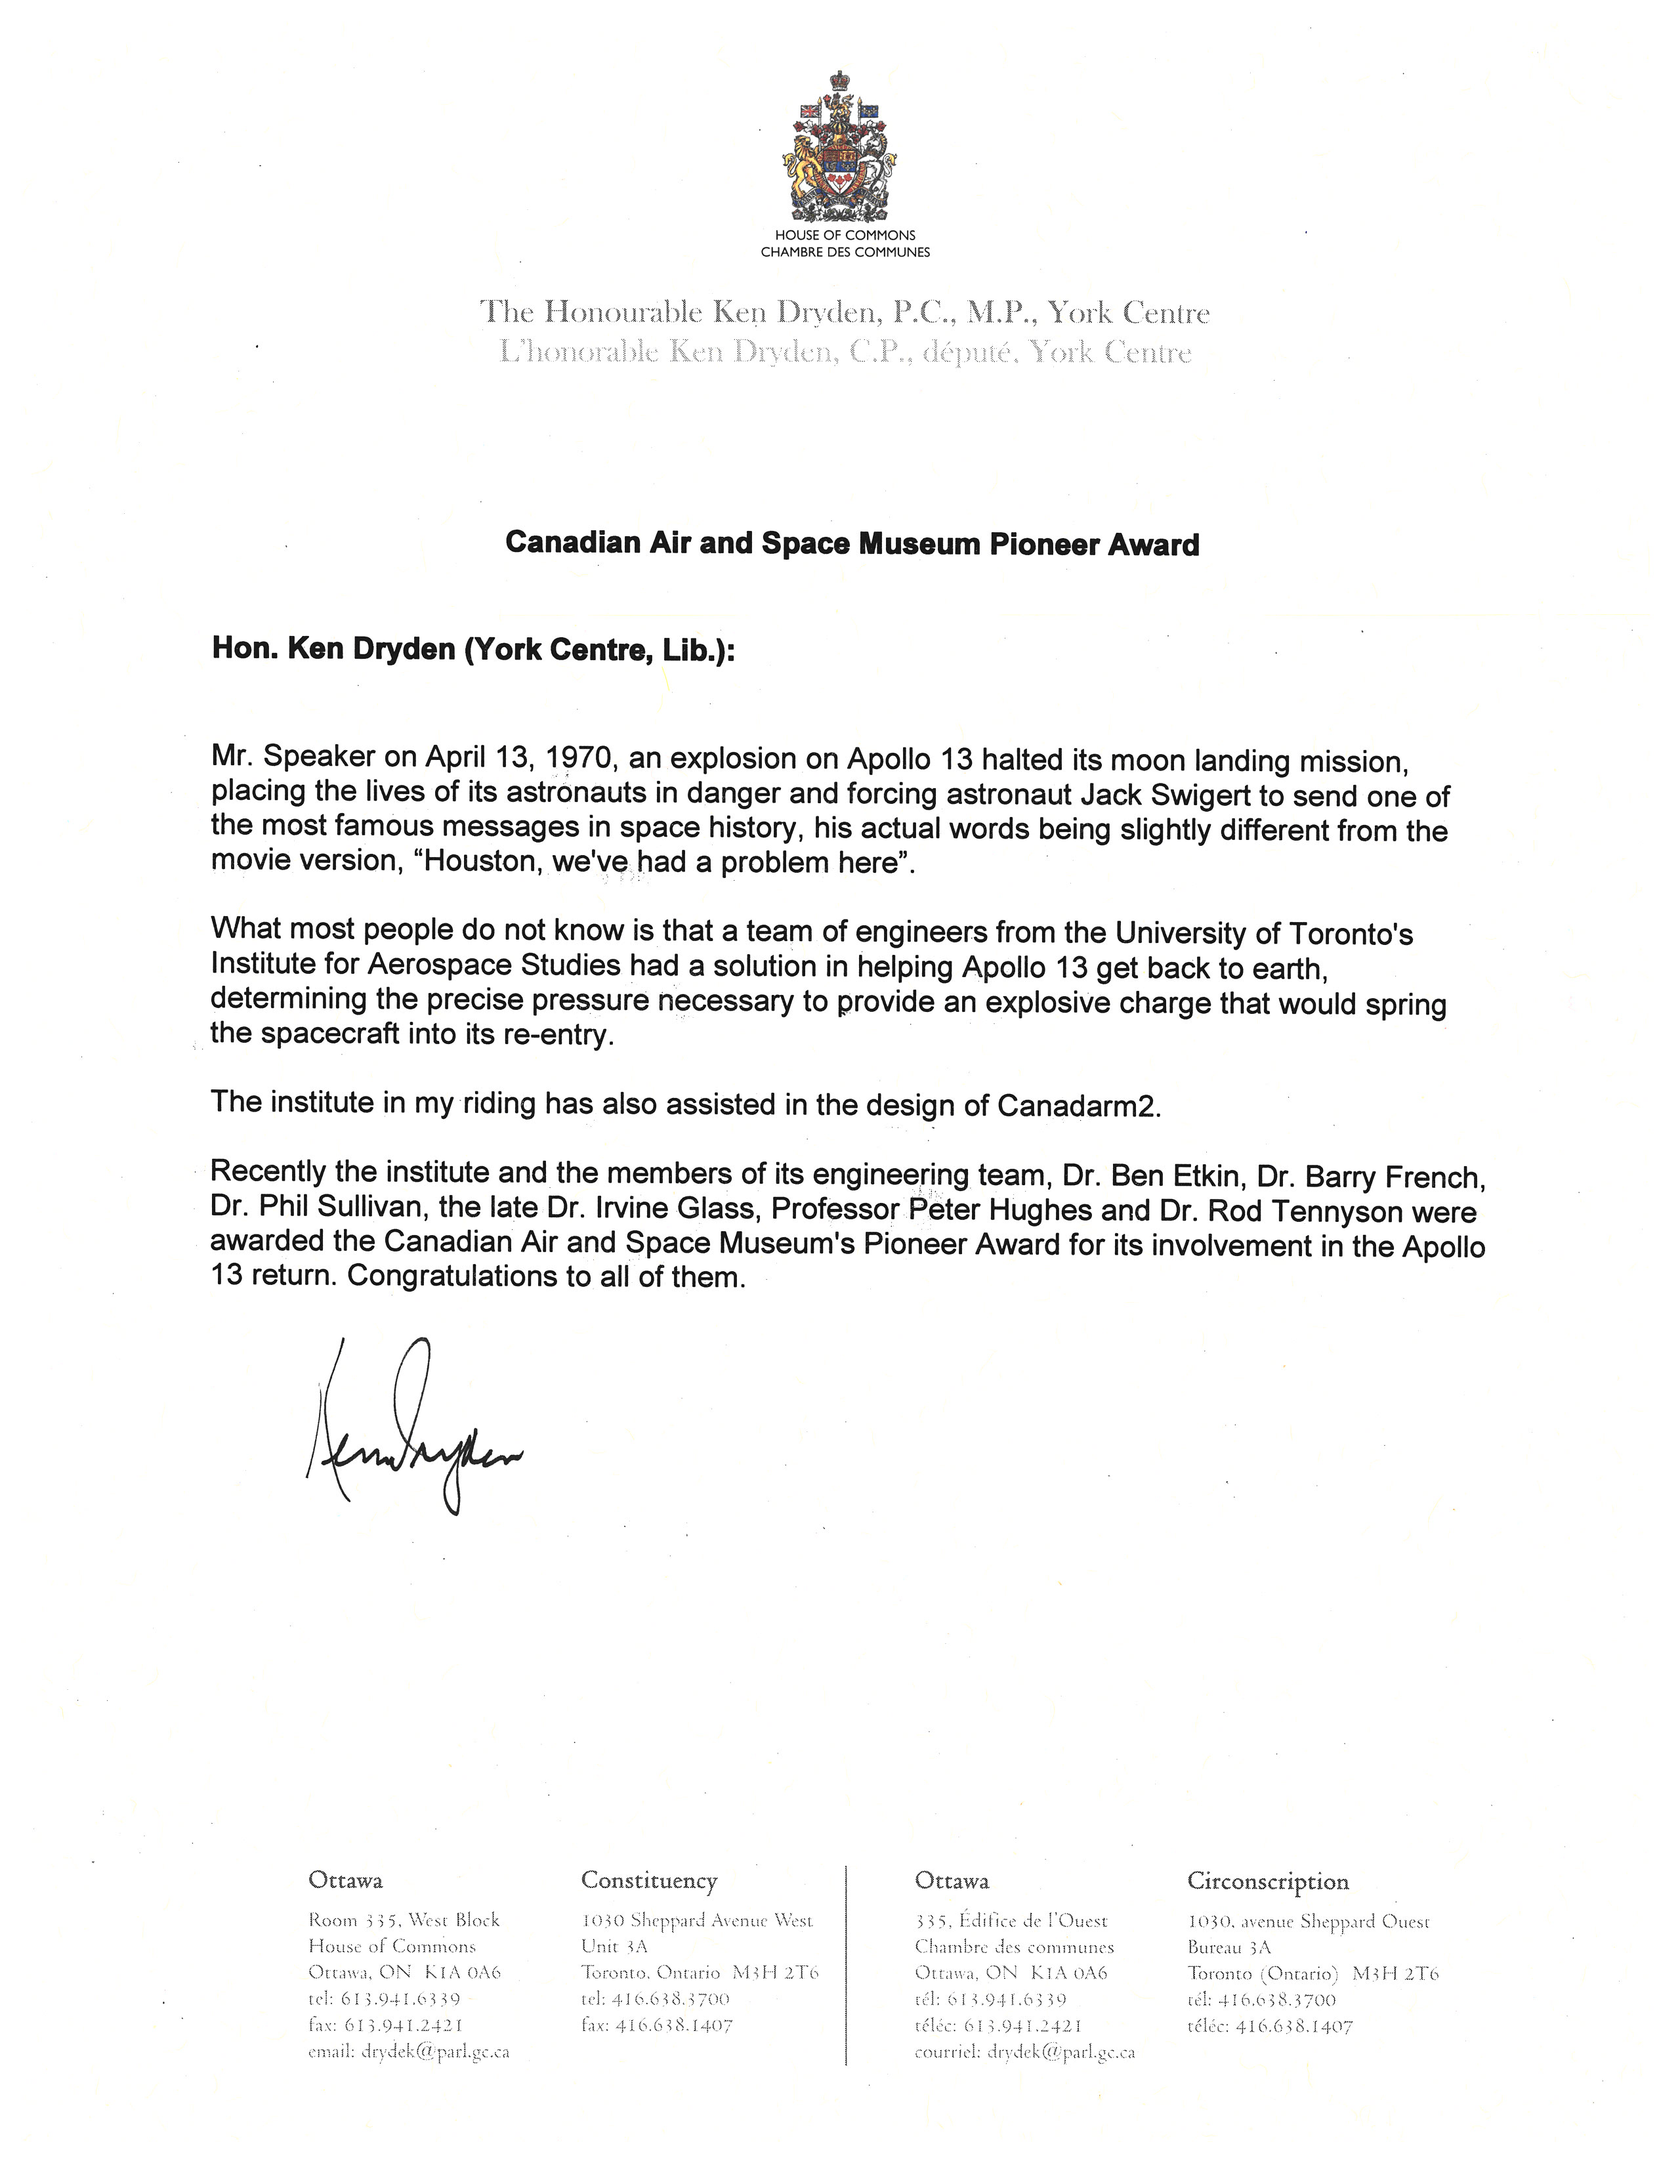 Formal letter by The Honourable Ken Dryden for the Canadian Air and Space Museum Pioneer Award